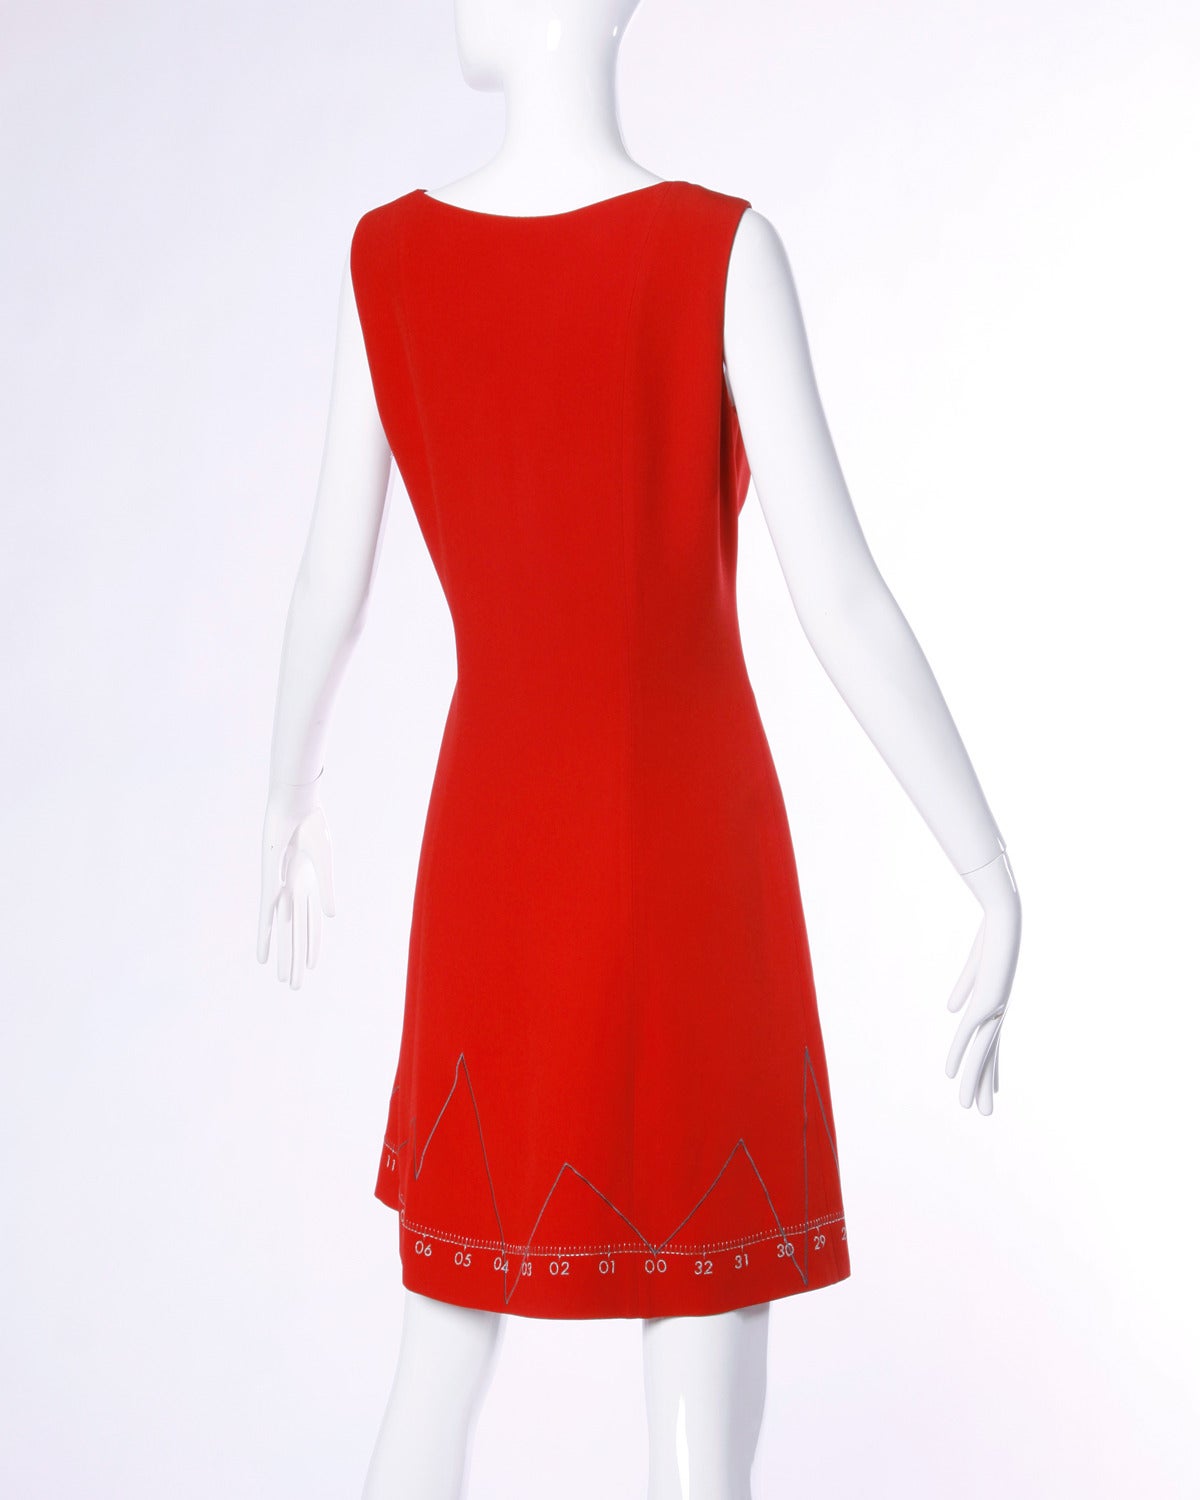 Reduced from $850. Iconic vintage Moschino red dress with embroidered love charts and graphs. The dress features numbers along the bottom and the lower graph forms the shape of a heart.

Details:

Fully Lined
Side Zip Closure
Marked Size: US